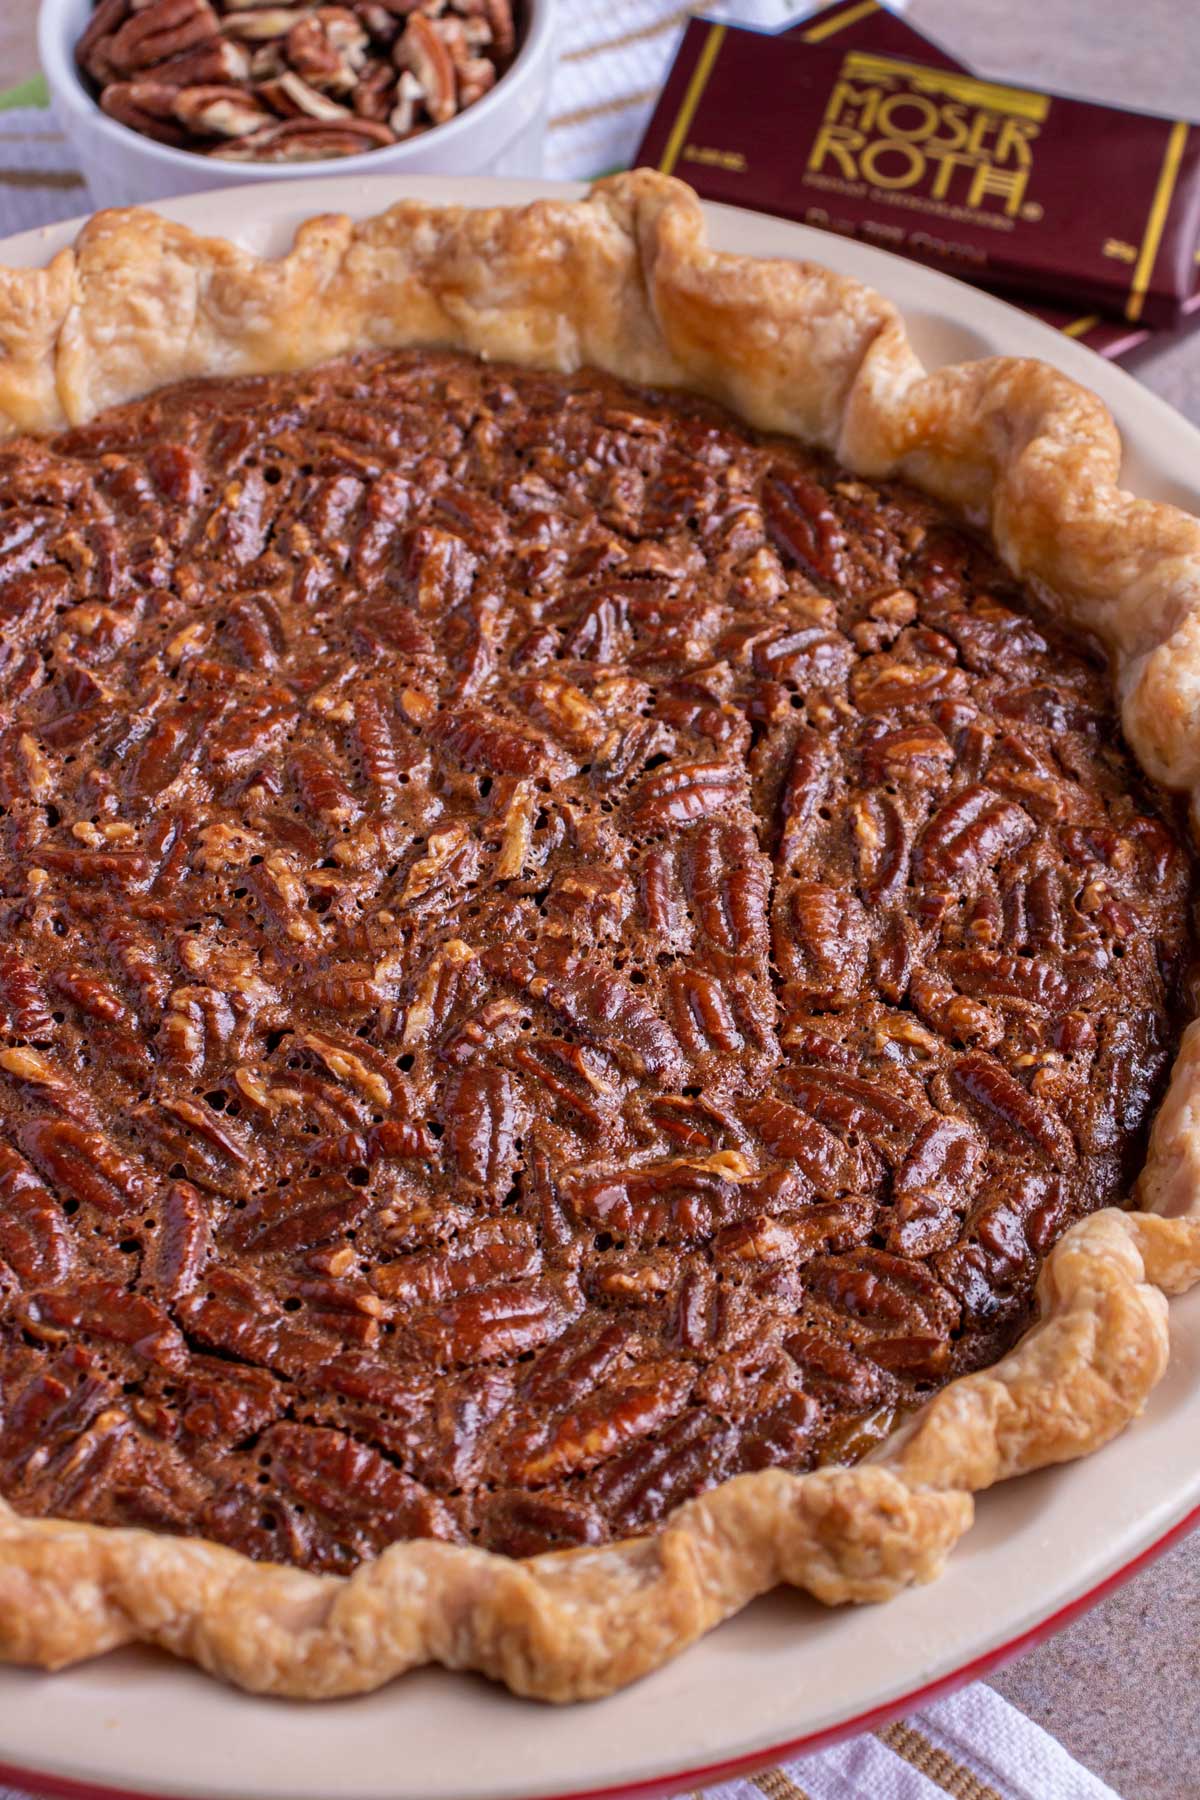 A pecan pie in a ceramic pie dish with pecans and chocolate bars in the background.